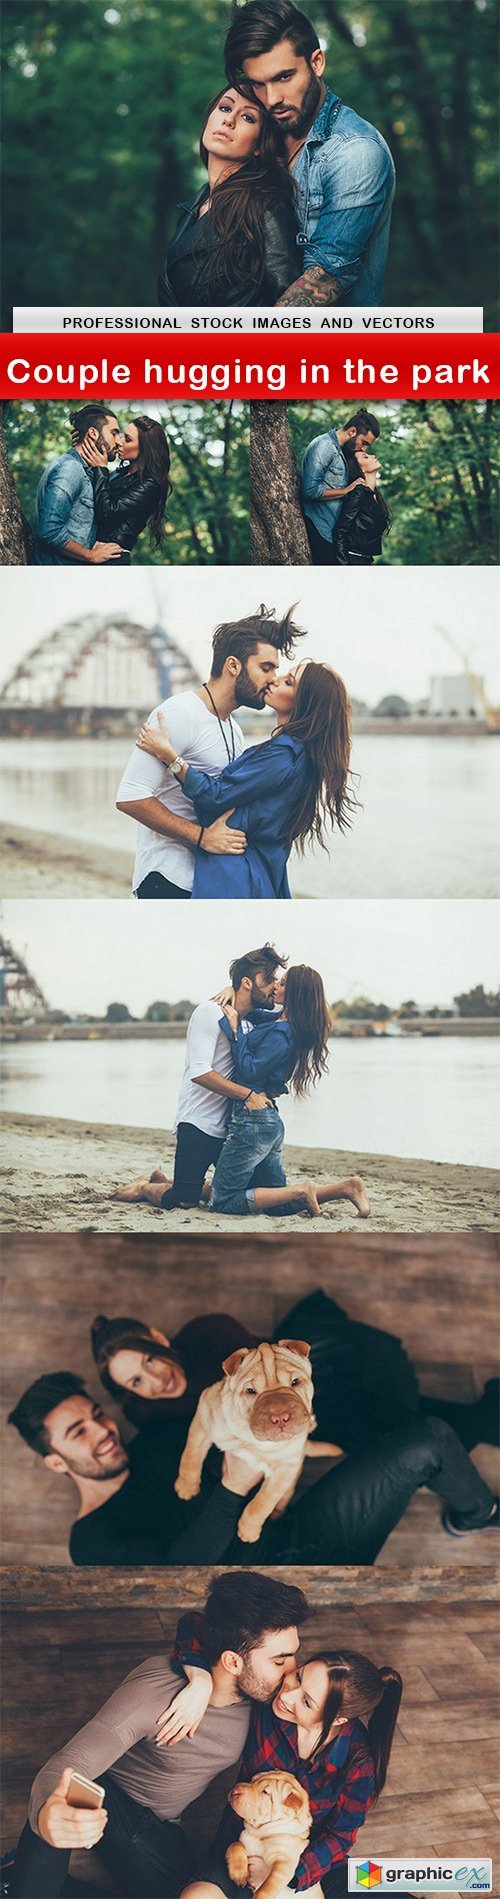 Couple hugging in the park - 7 UHQ JPEG